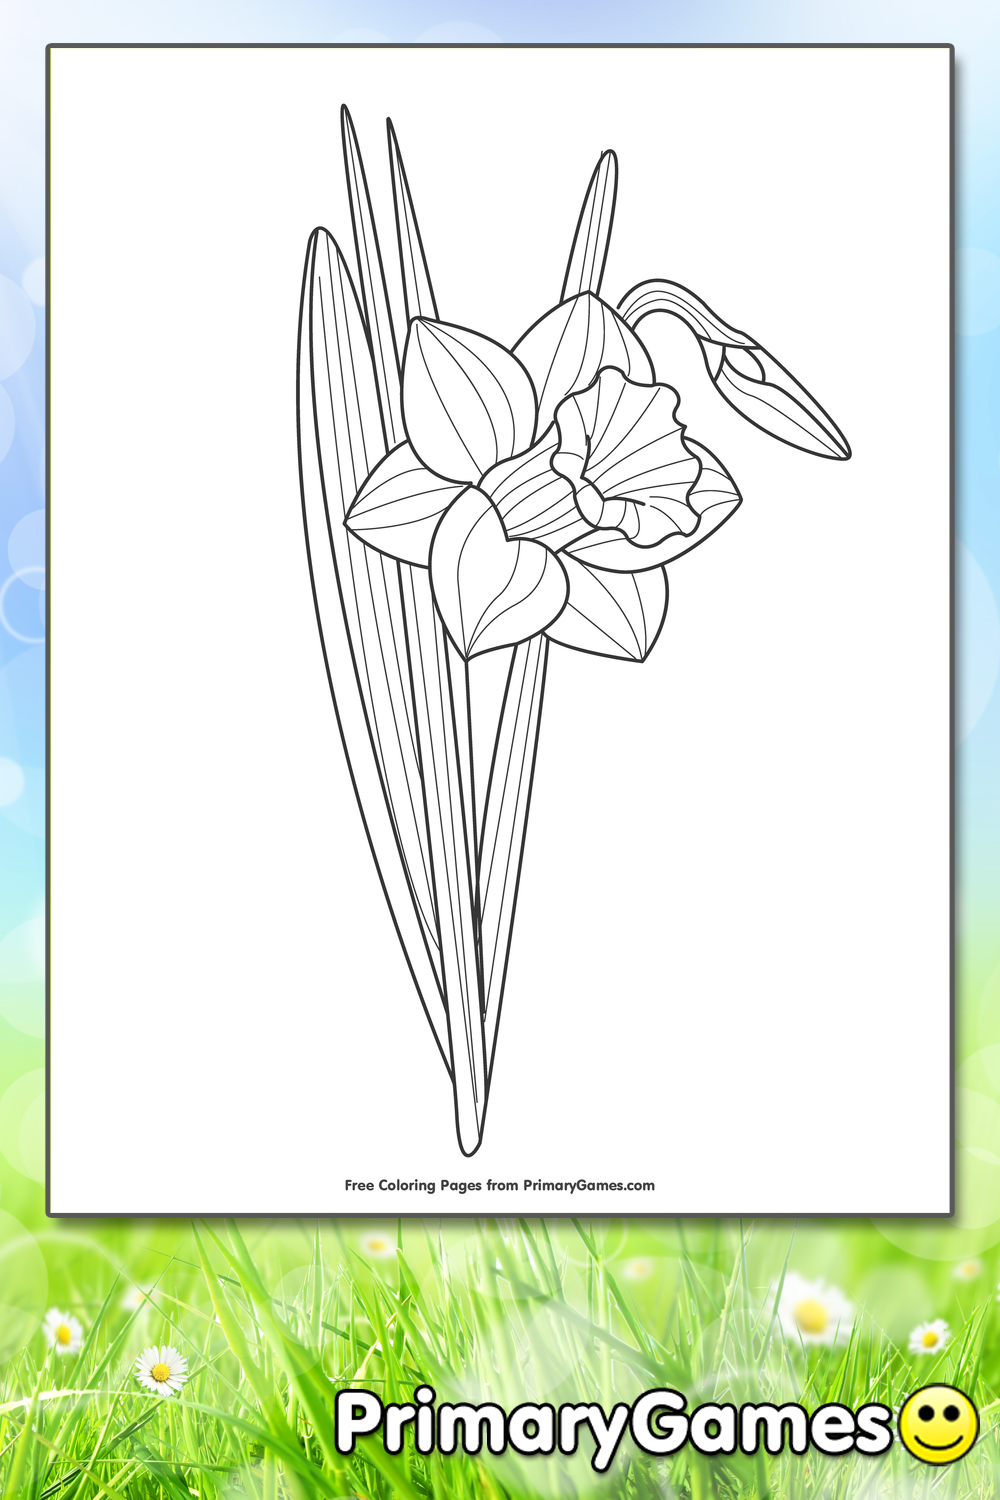 Daffodil Coloring Page   Printable Spring Coloring eBook ...